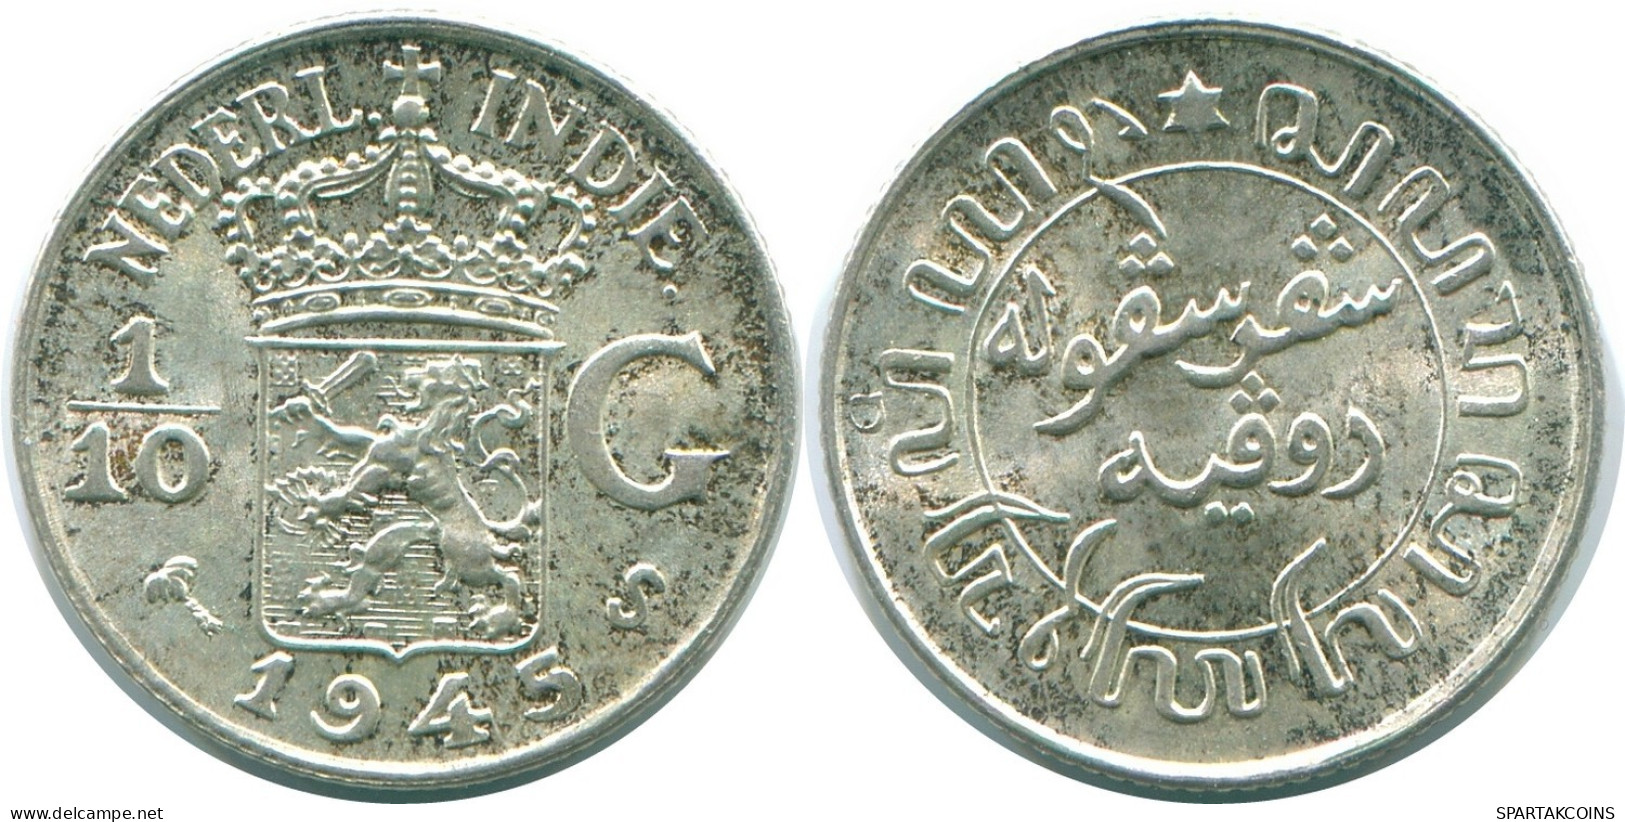 1/10 GULDEN 1945 S NETHERLANDS EAST INDIES SILVER Colonial Coin #NL14107.3.U.A - Dutch East Indies